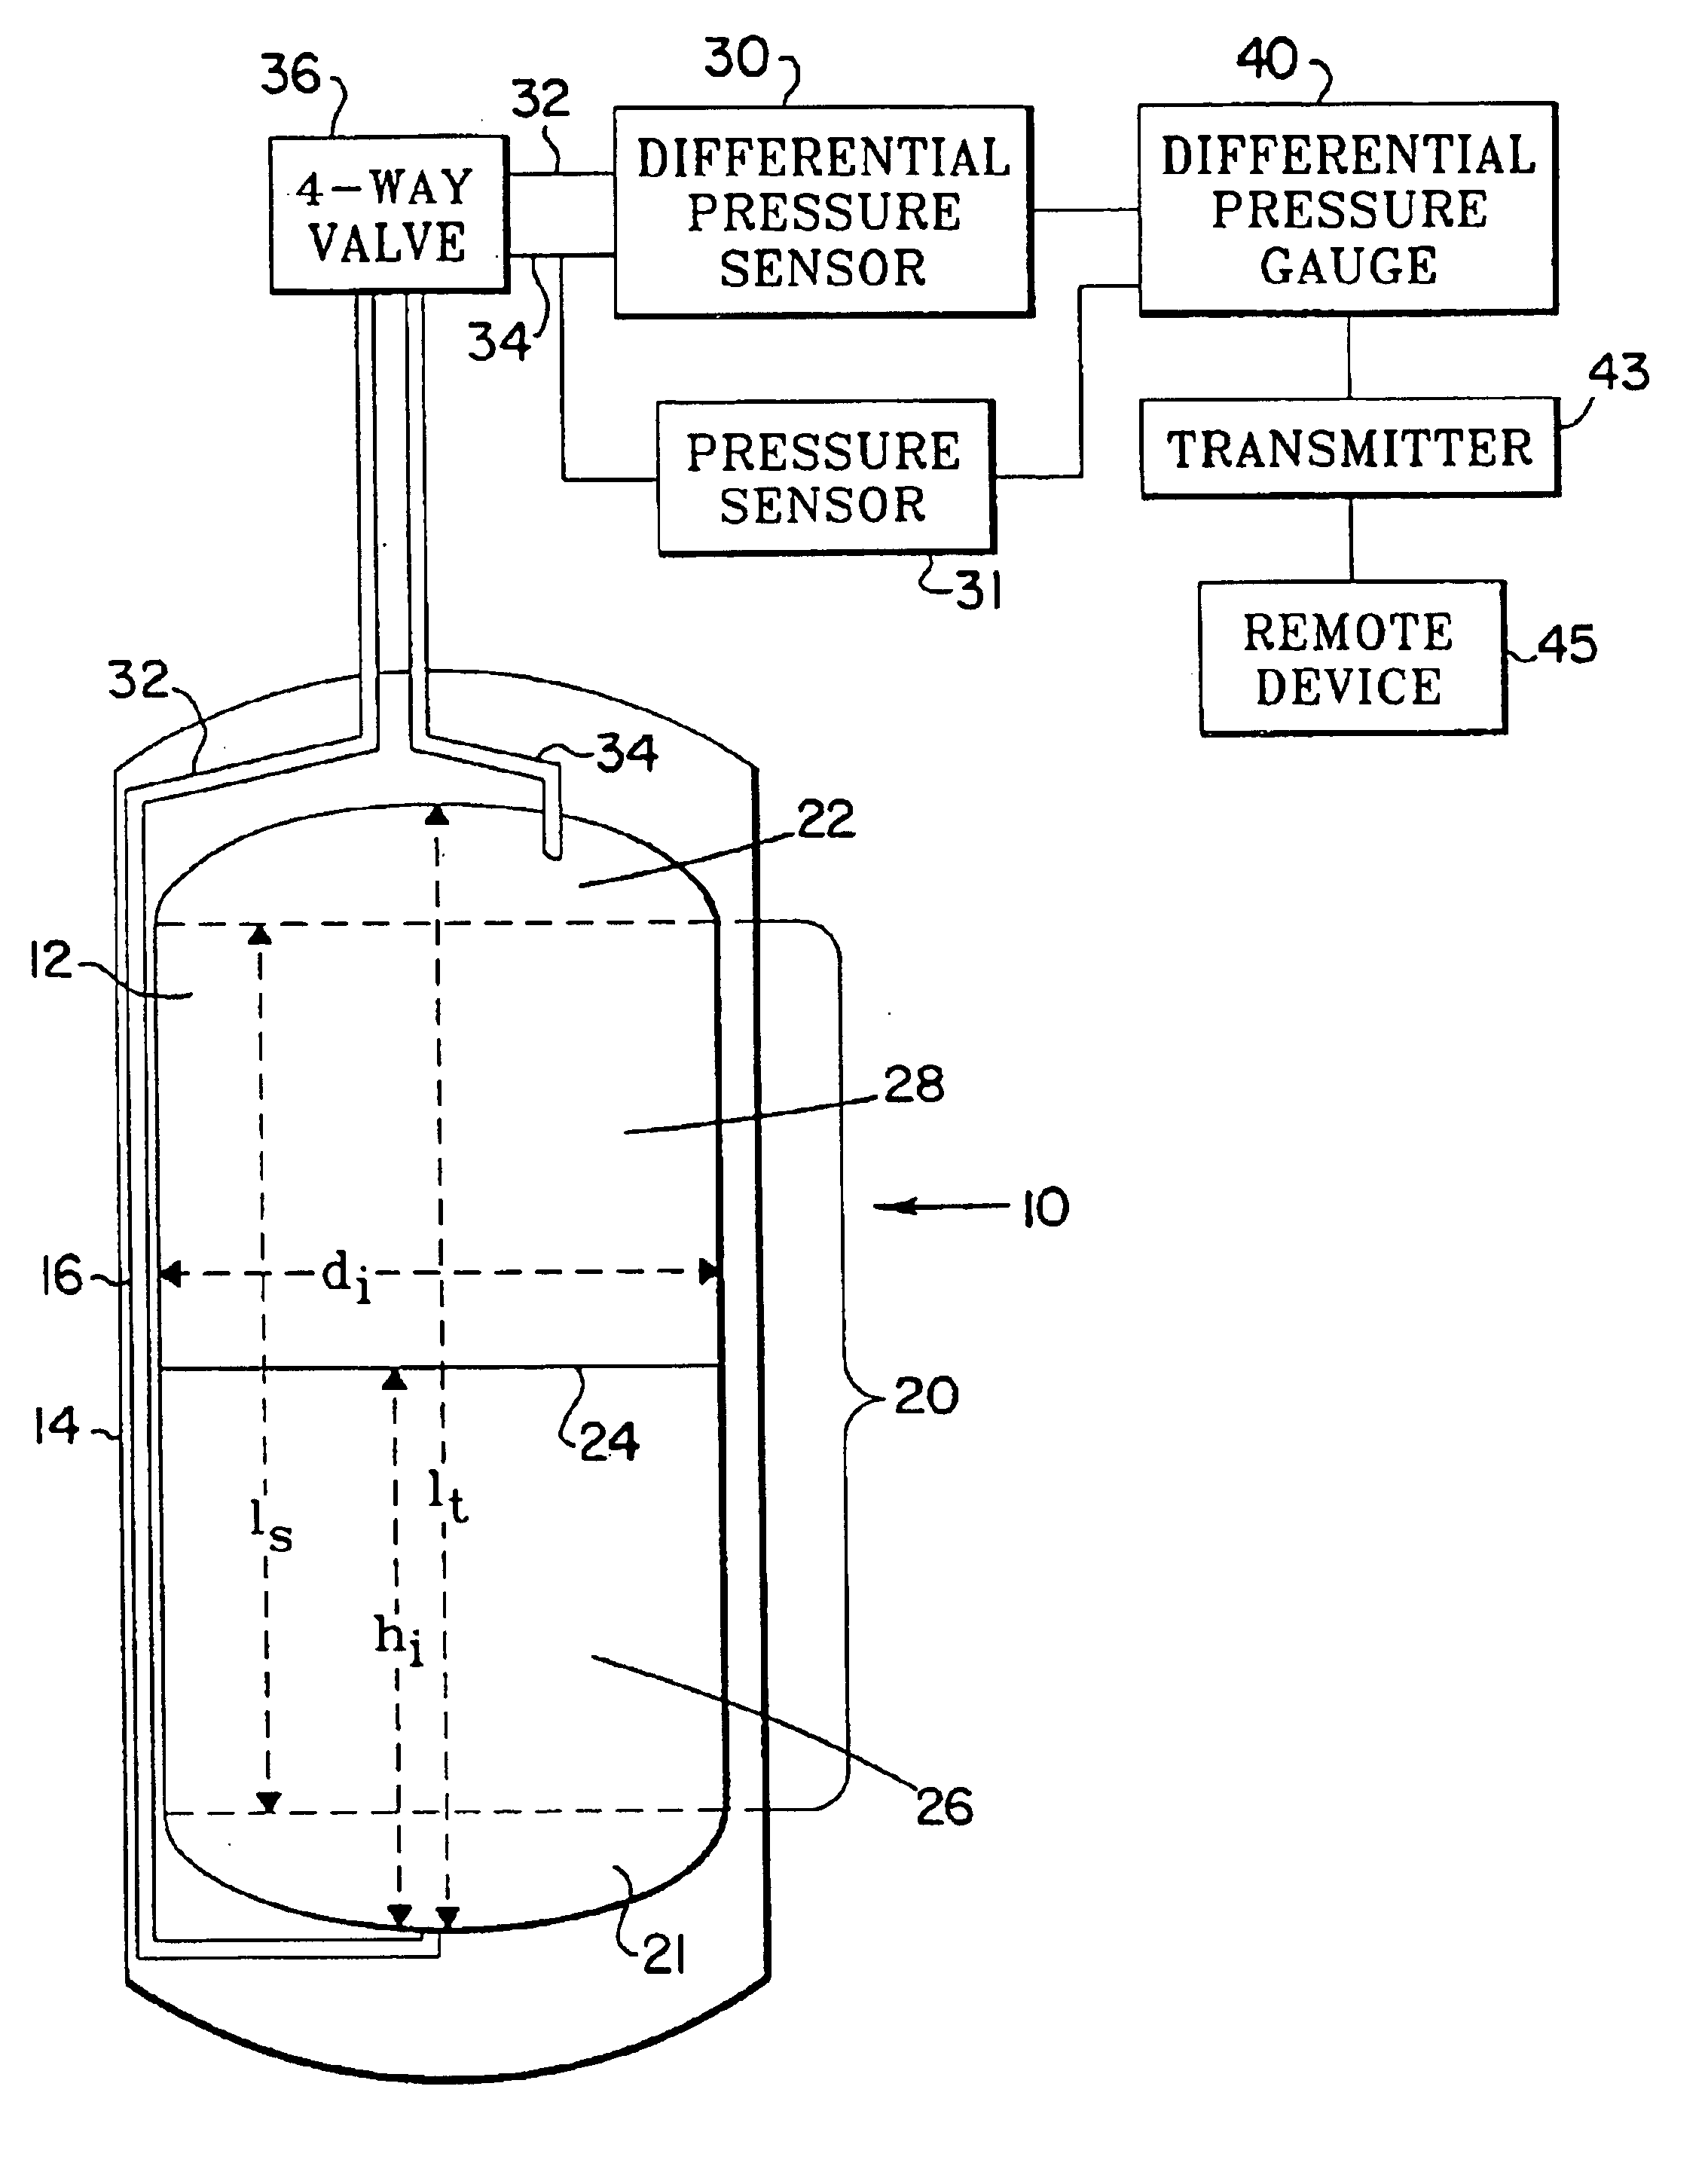 Differential pressure gauge for cryogenic fluids which selects a density value based on pressure measurement